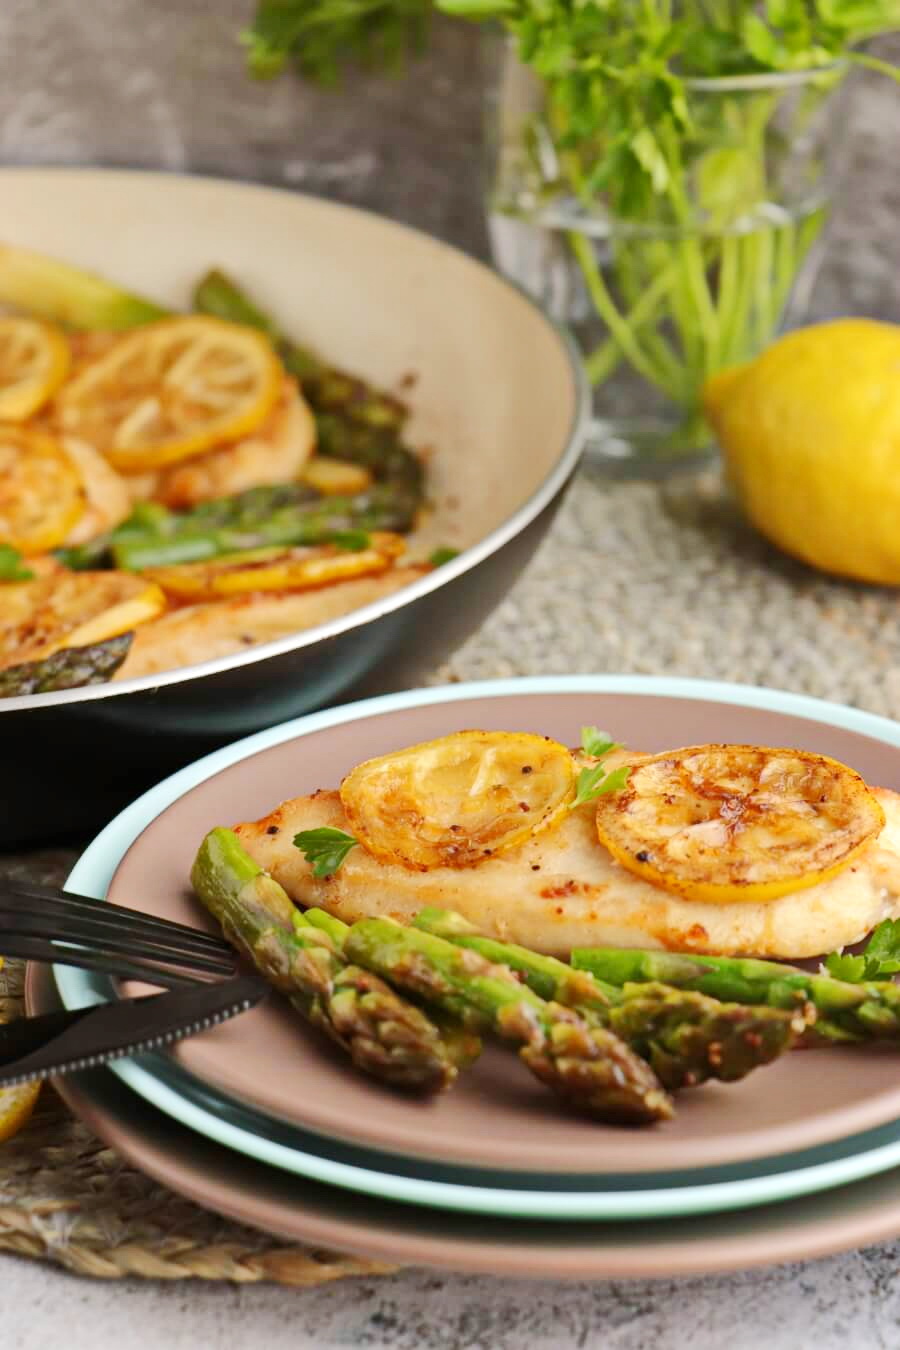 5 Ingredient Lemon Chicken with Asparagus Recipe - Cook.me Recipes